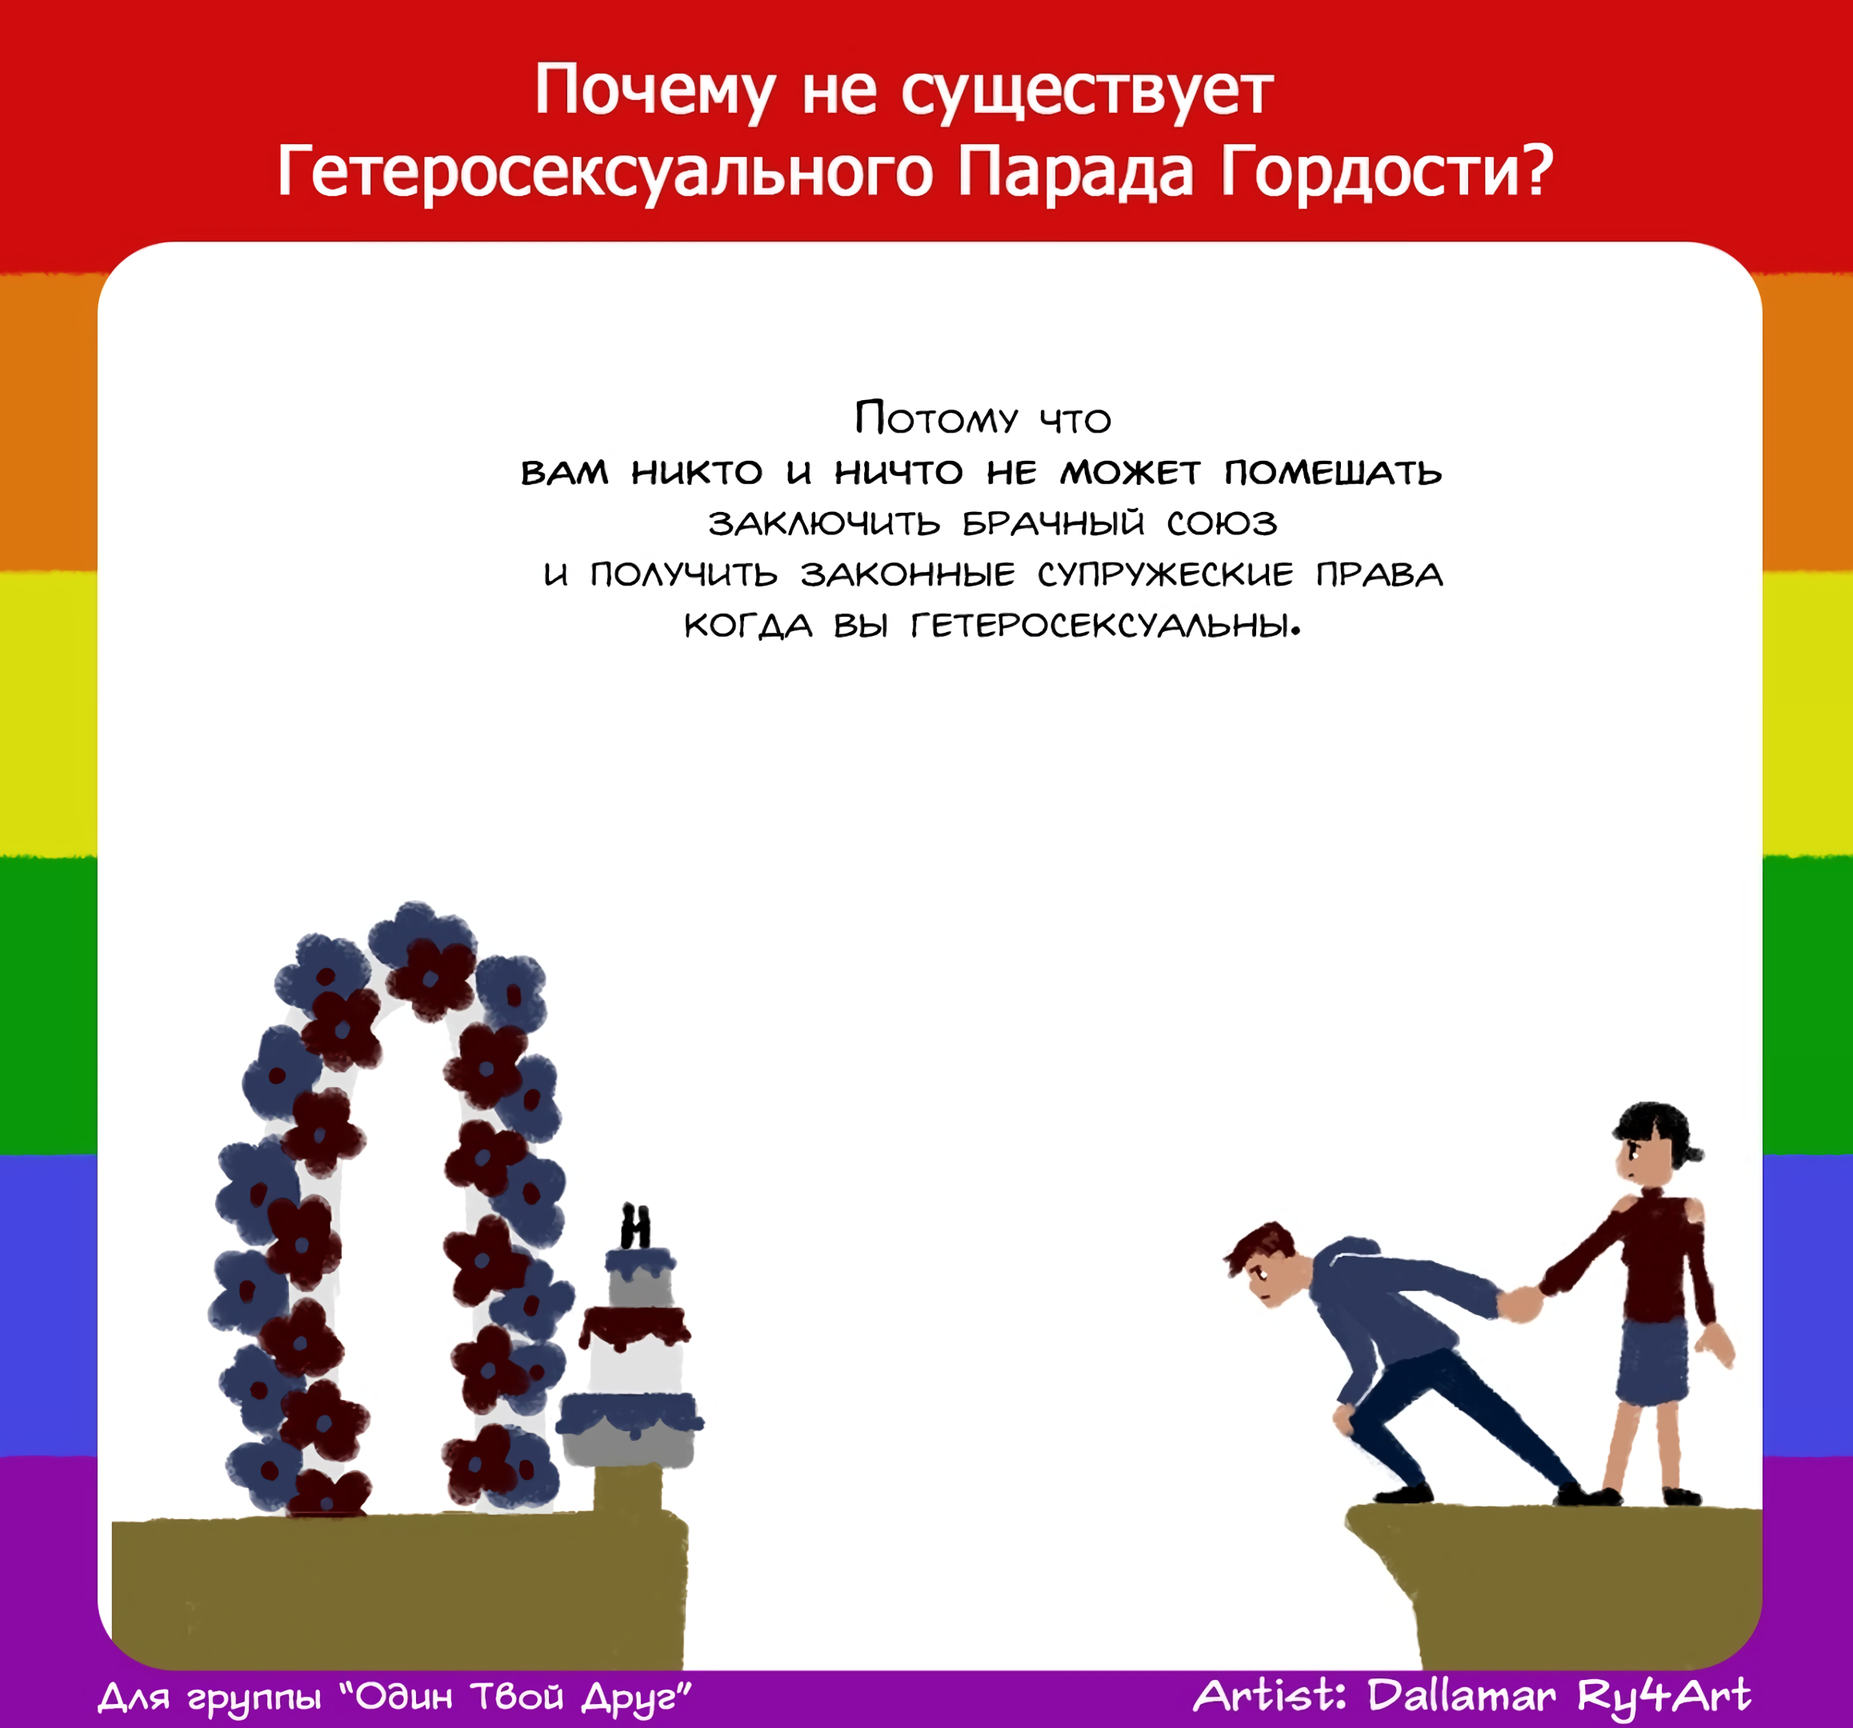 Why heterosexual pride parades are not needed - Comics, LGBT, Problem, Heterosexual, Why?, Does not exist, Parade, Longpost